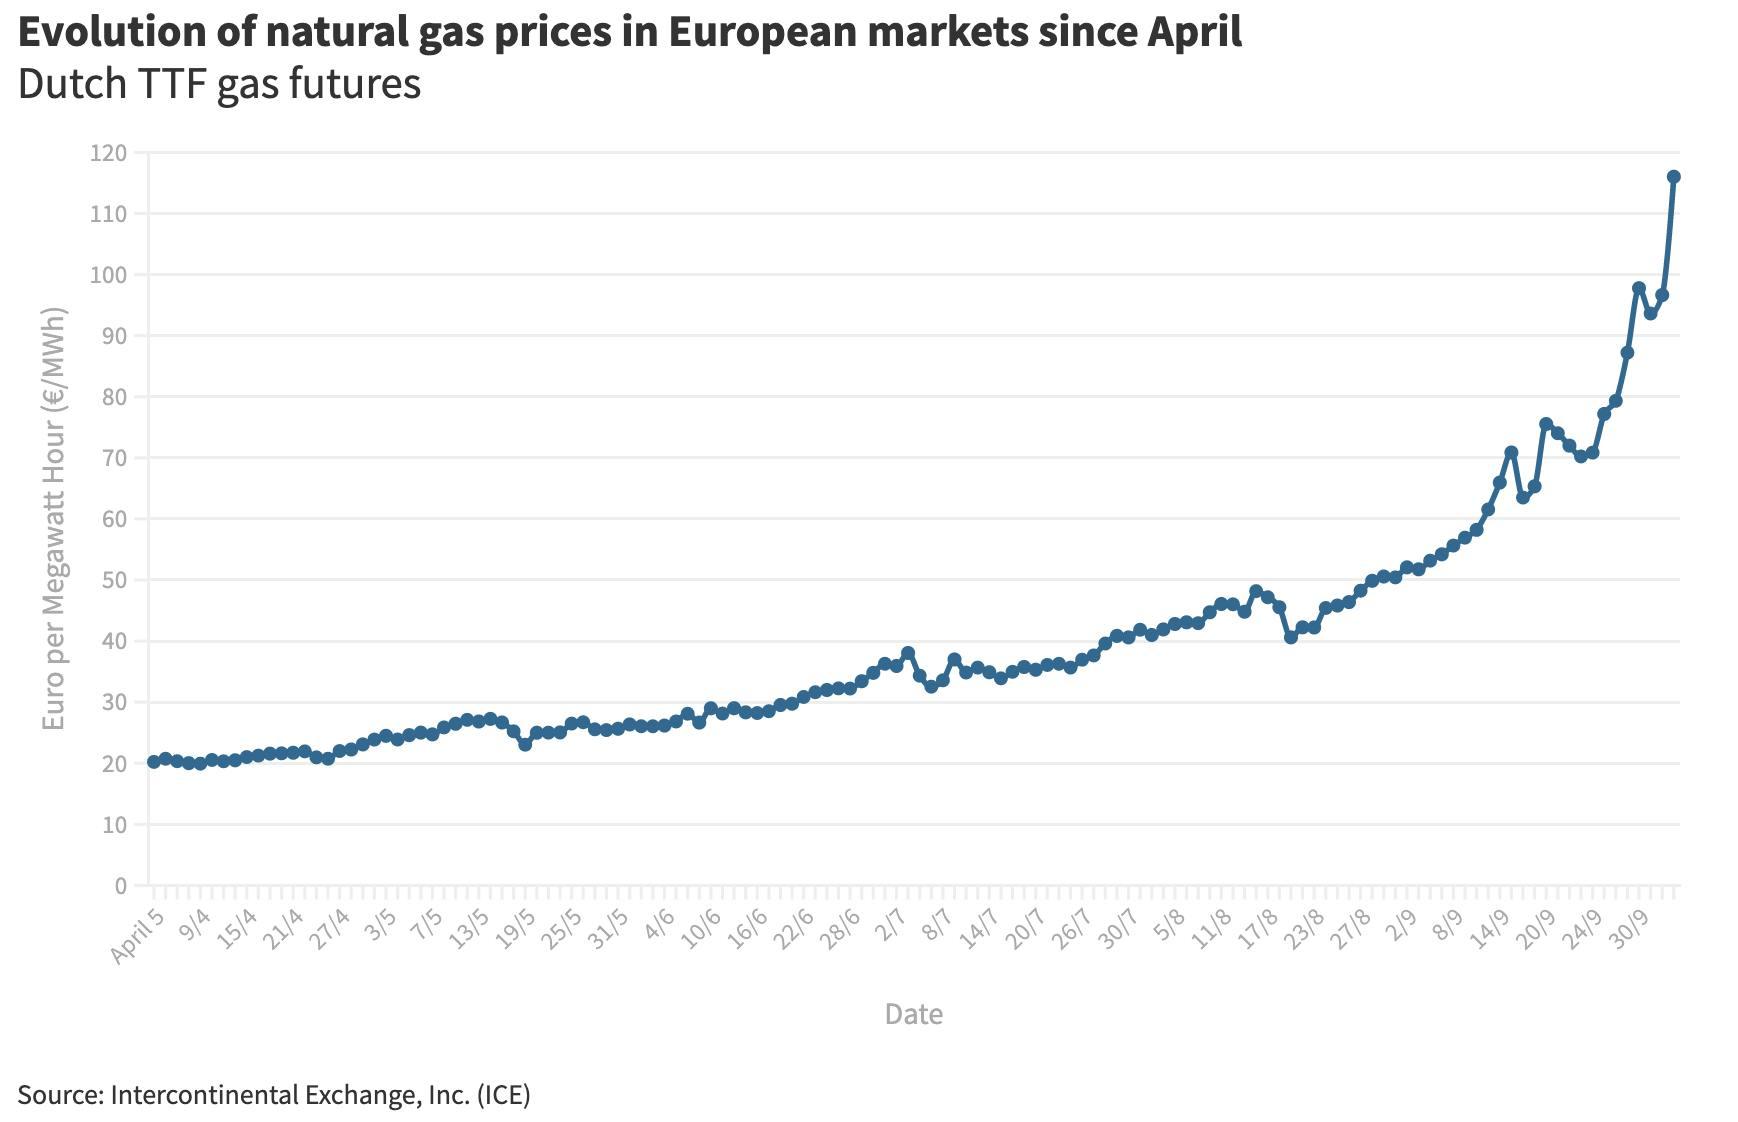 Evolution of natural gas prices in European markets since April 